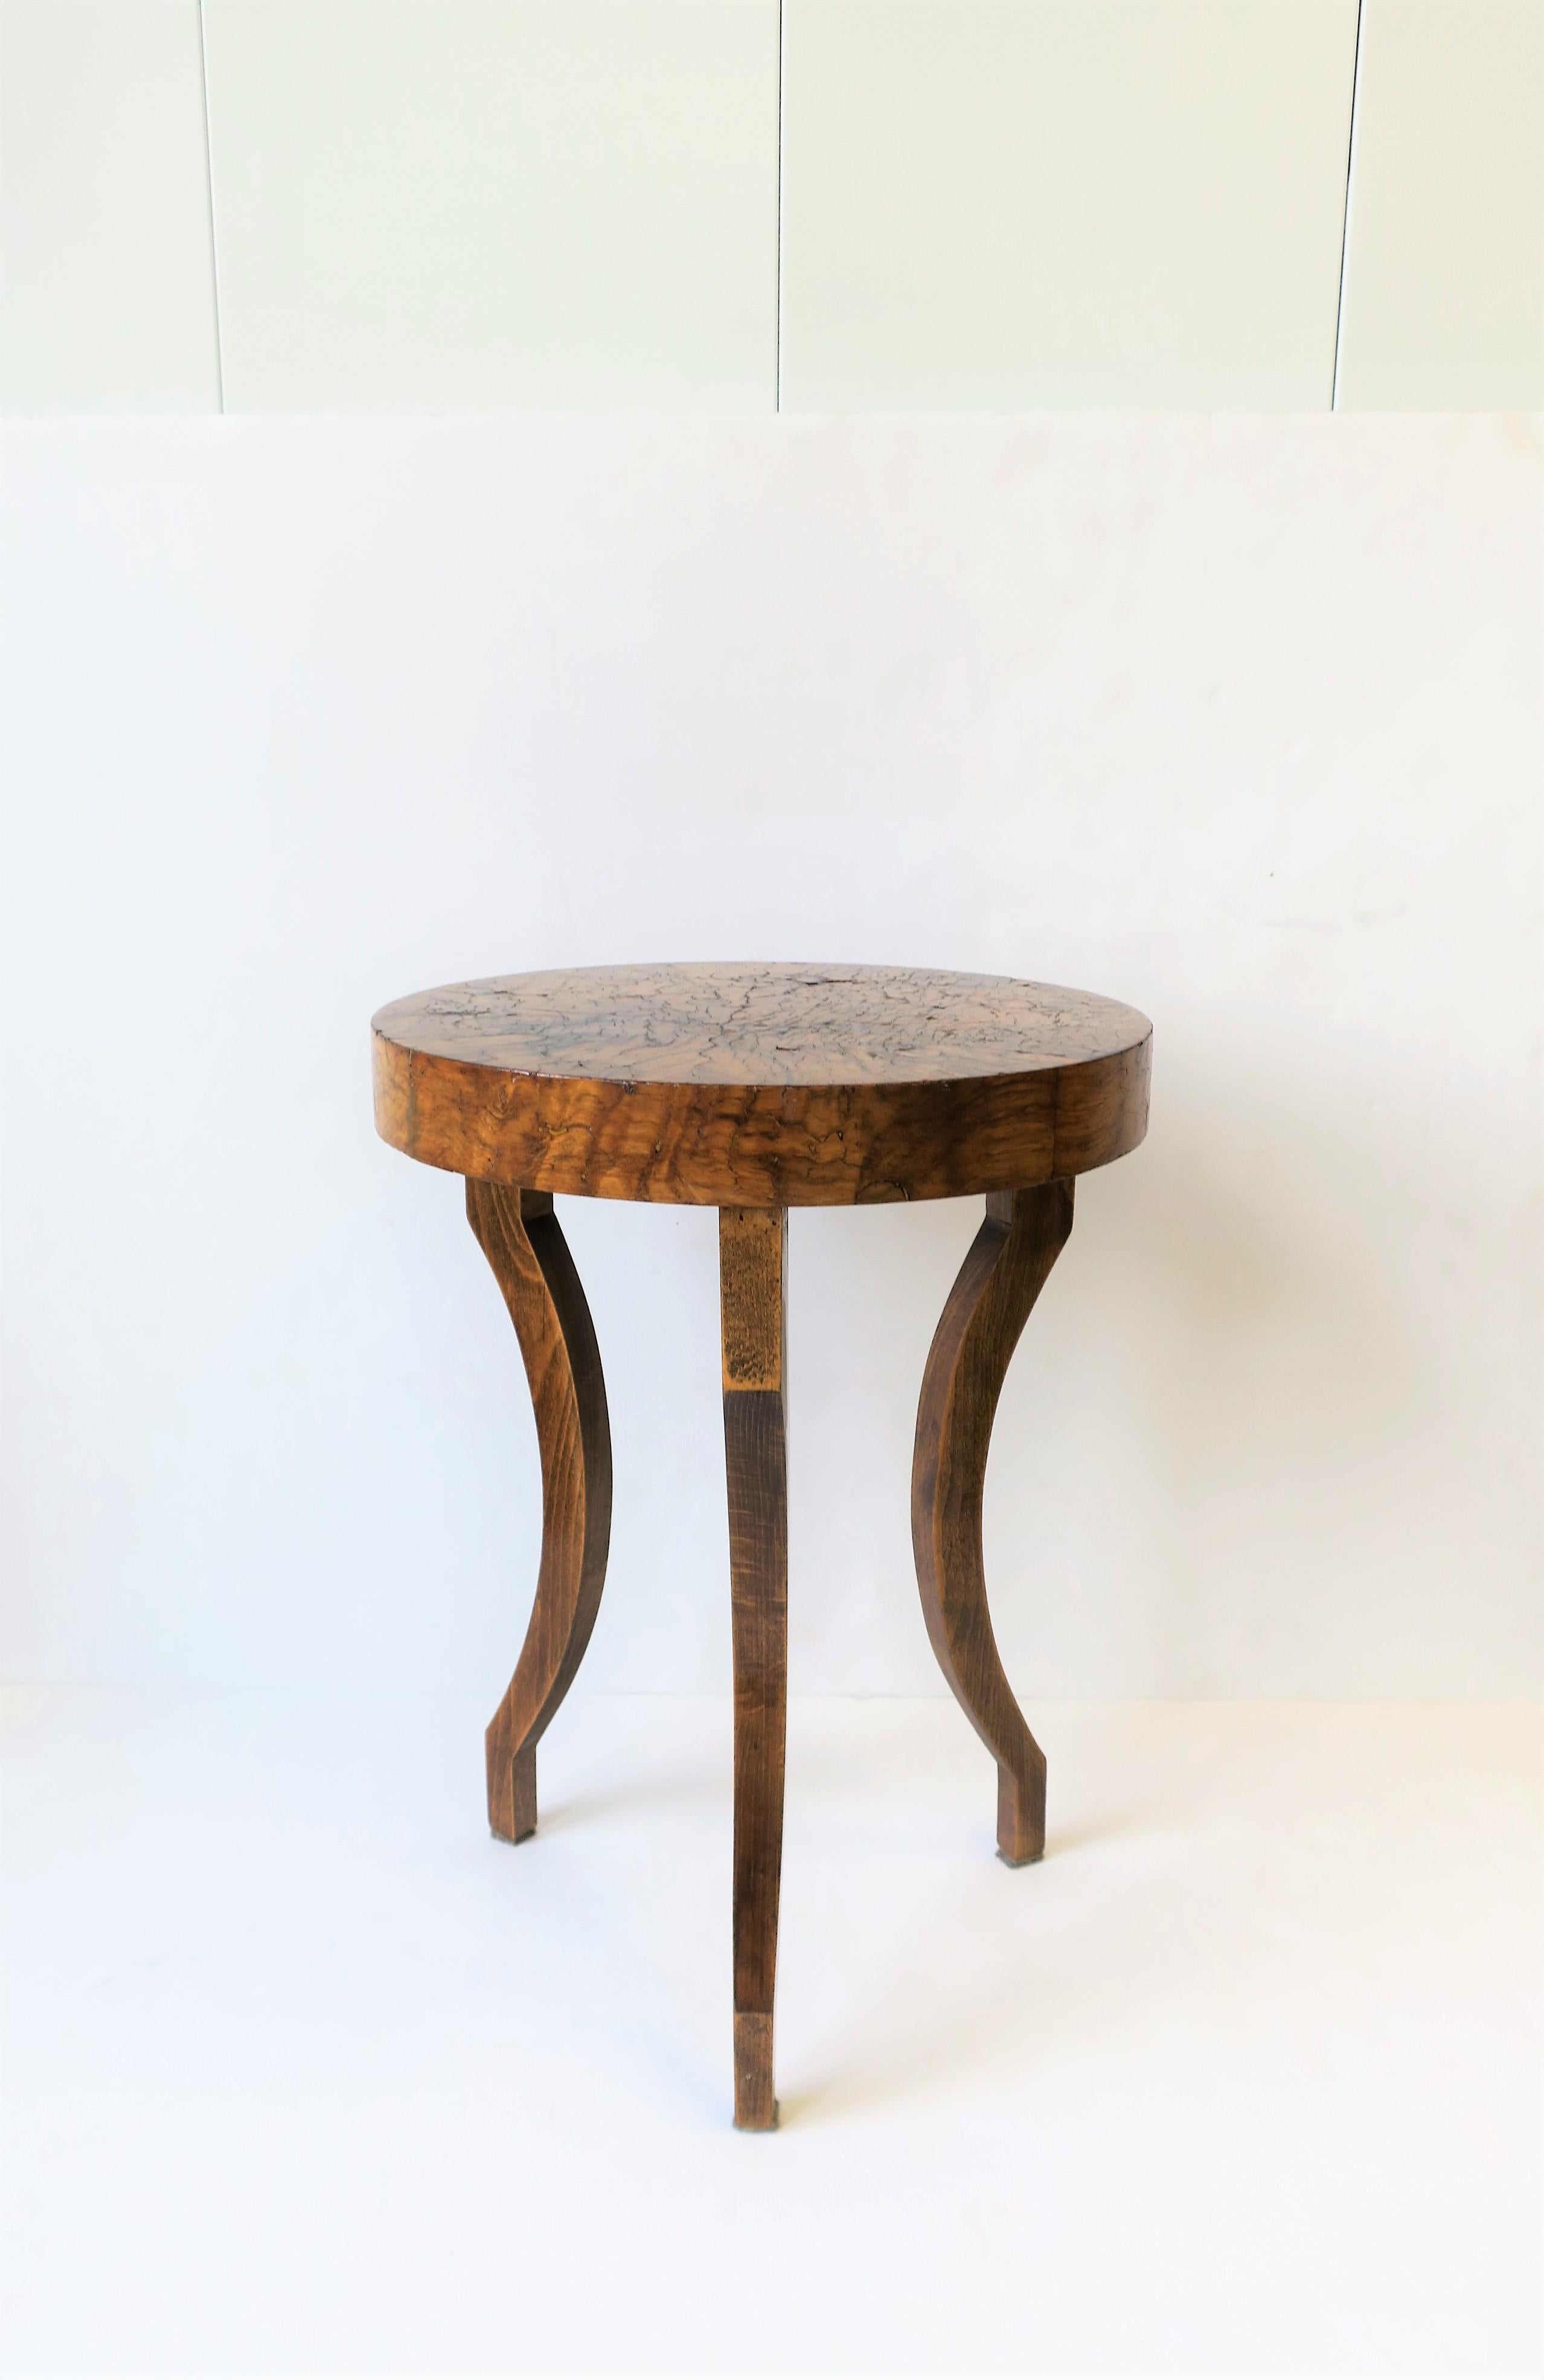 A small rich wood gueridon side or drinks tables with decorative legs. Tabletop and sides may be a burl or fruitwood veneer. 

Table measures: 13.75 in. Diameter x 18.5 in. H.
   